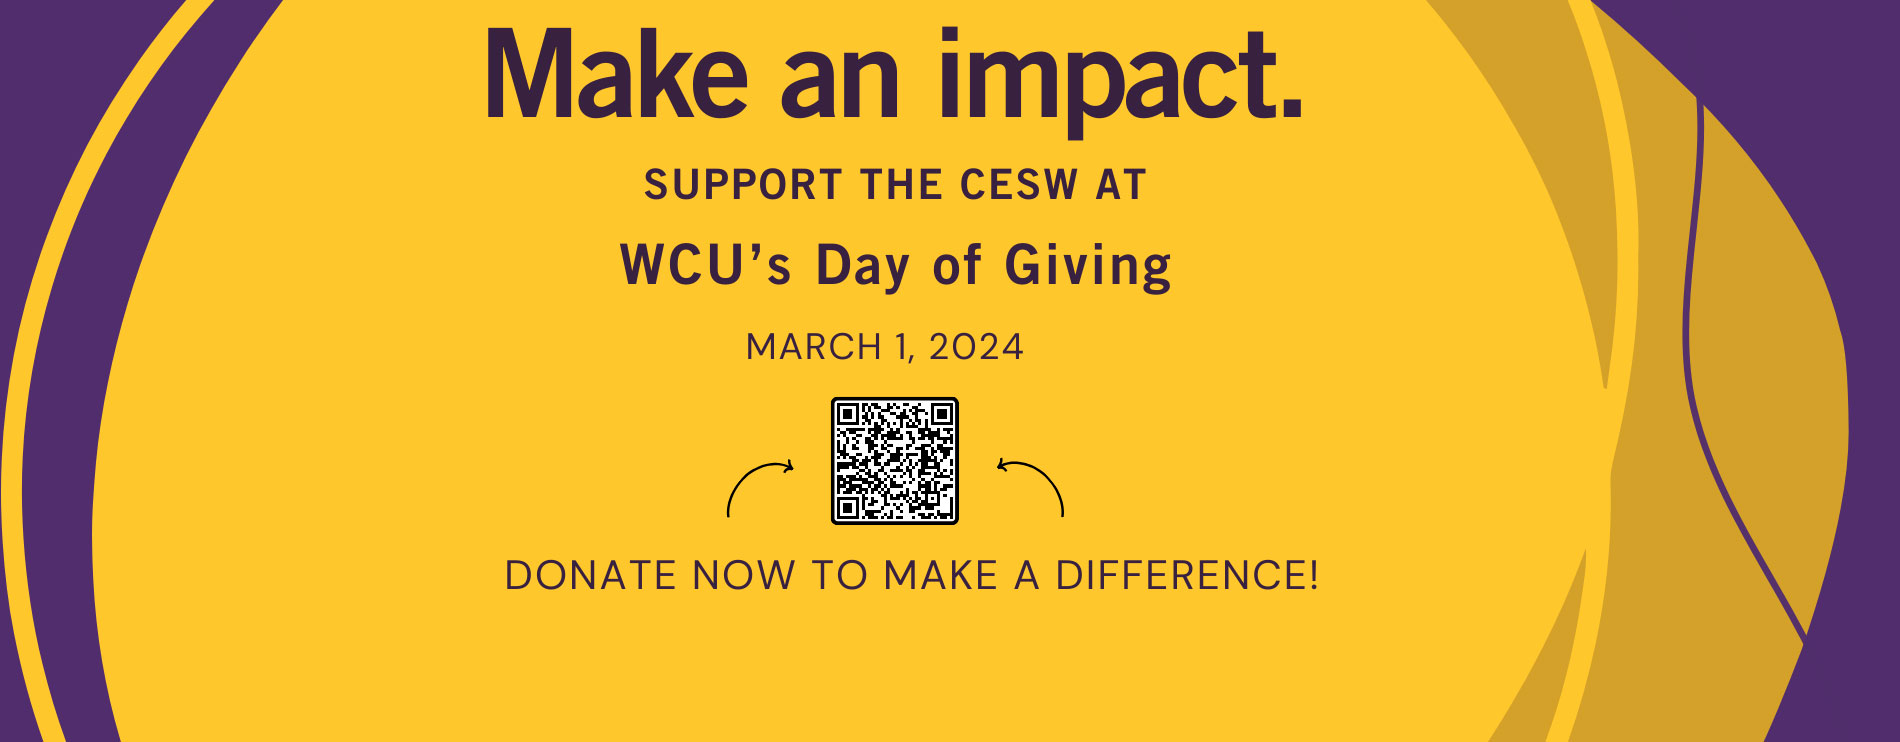 Make an impact. THE COLLEGE OF EDUCATION AND SOCIAL WORK'S DAY OF GIVING MARCH 1, 2024